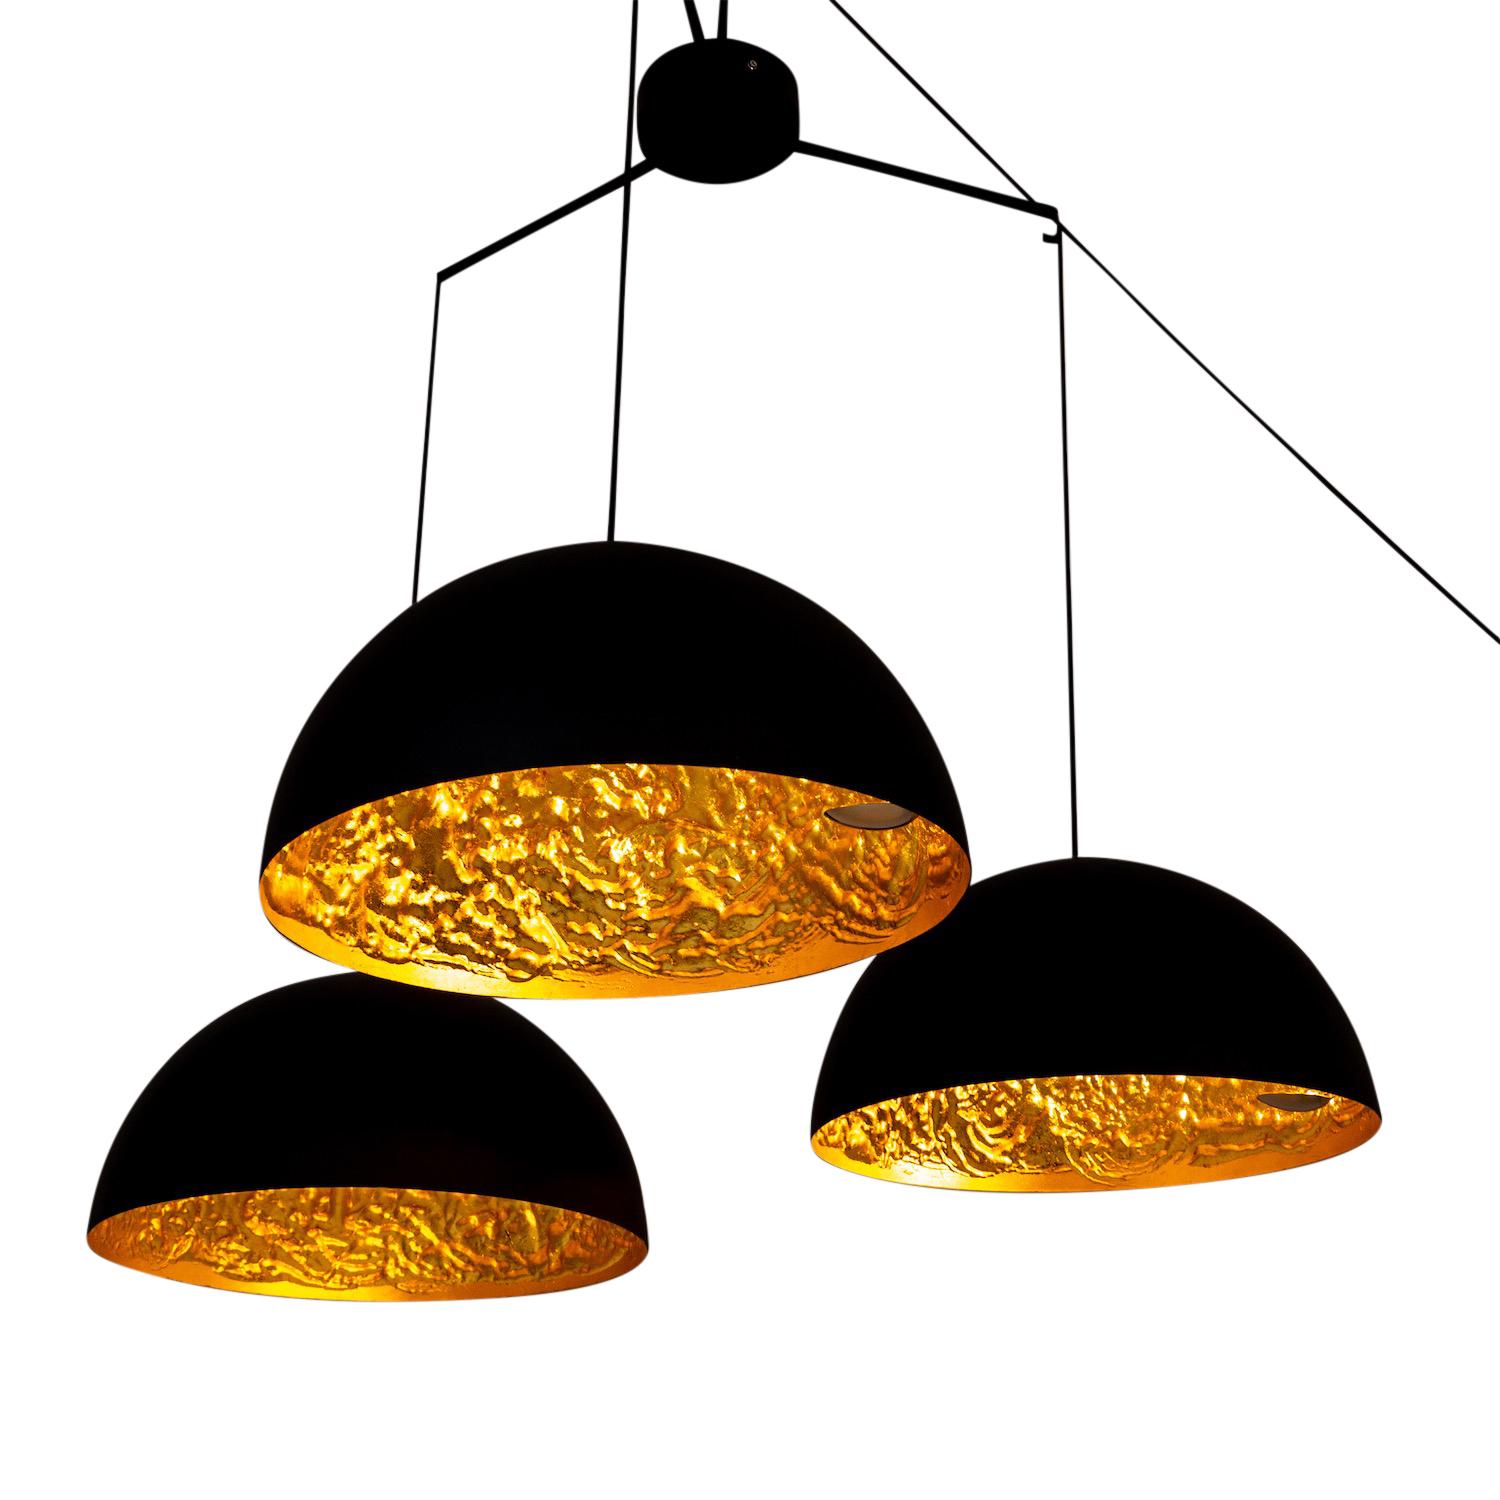 Mid-Century Modern 20th Century Black-Gold Italian Vintage Metal Ceiling Light by Catellani & Smith For Sale